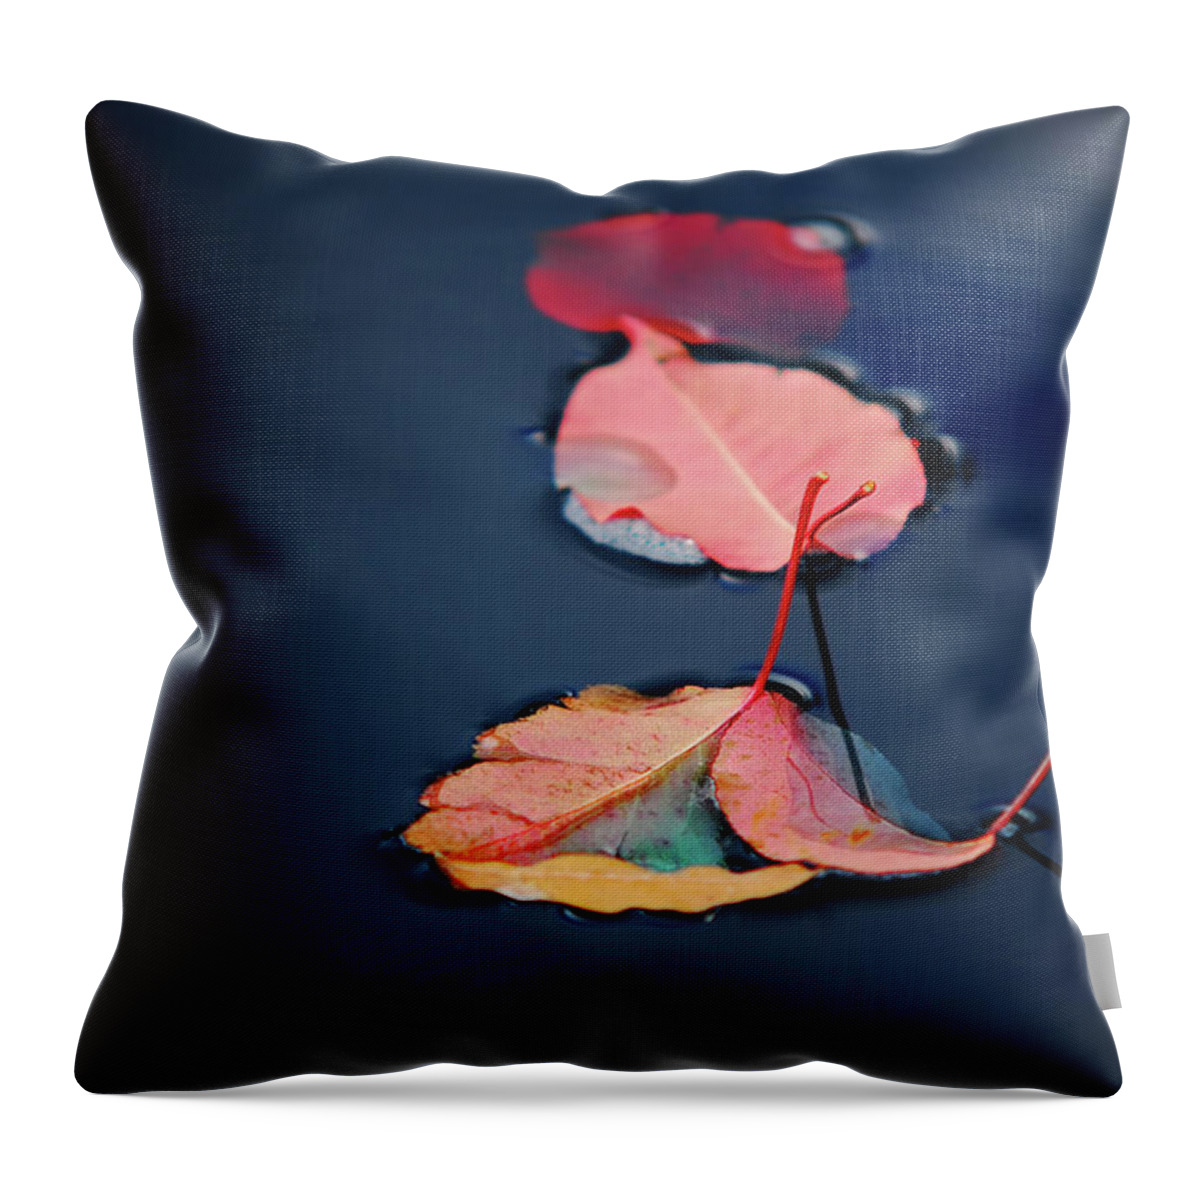 Outdoors Throw Pillow featuring the photograph Three Red Leaves Floating On Water by Richard Eden